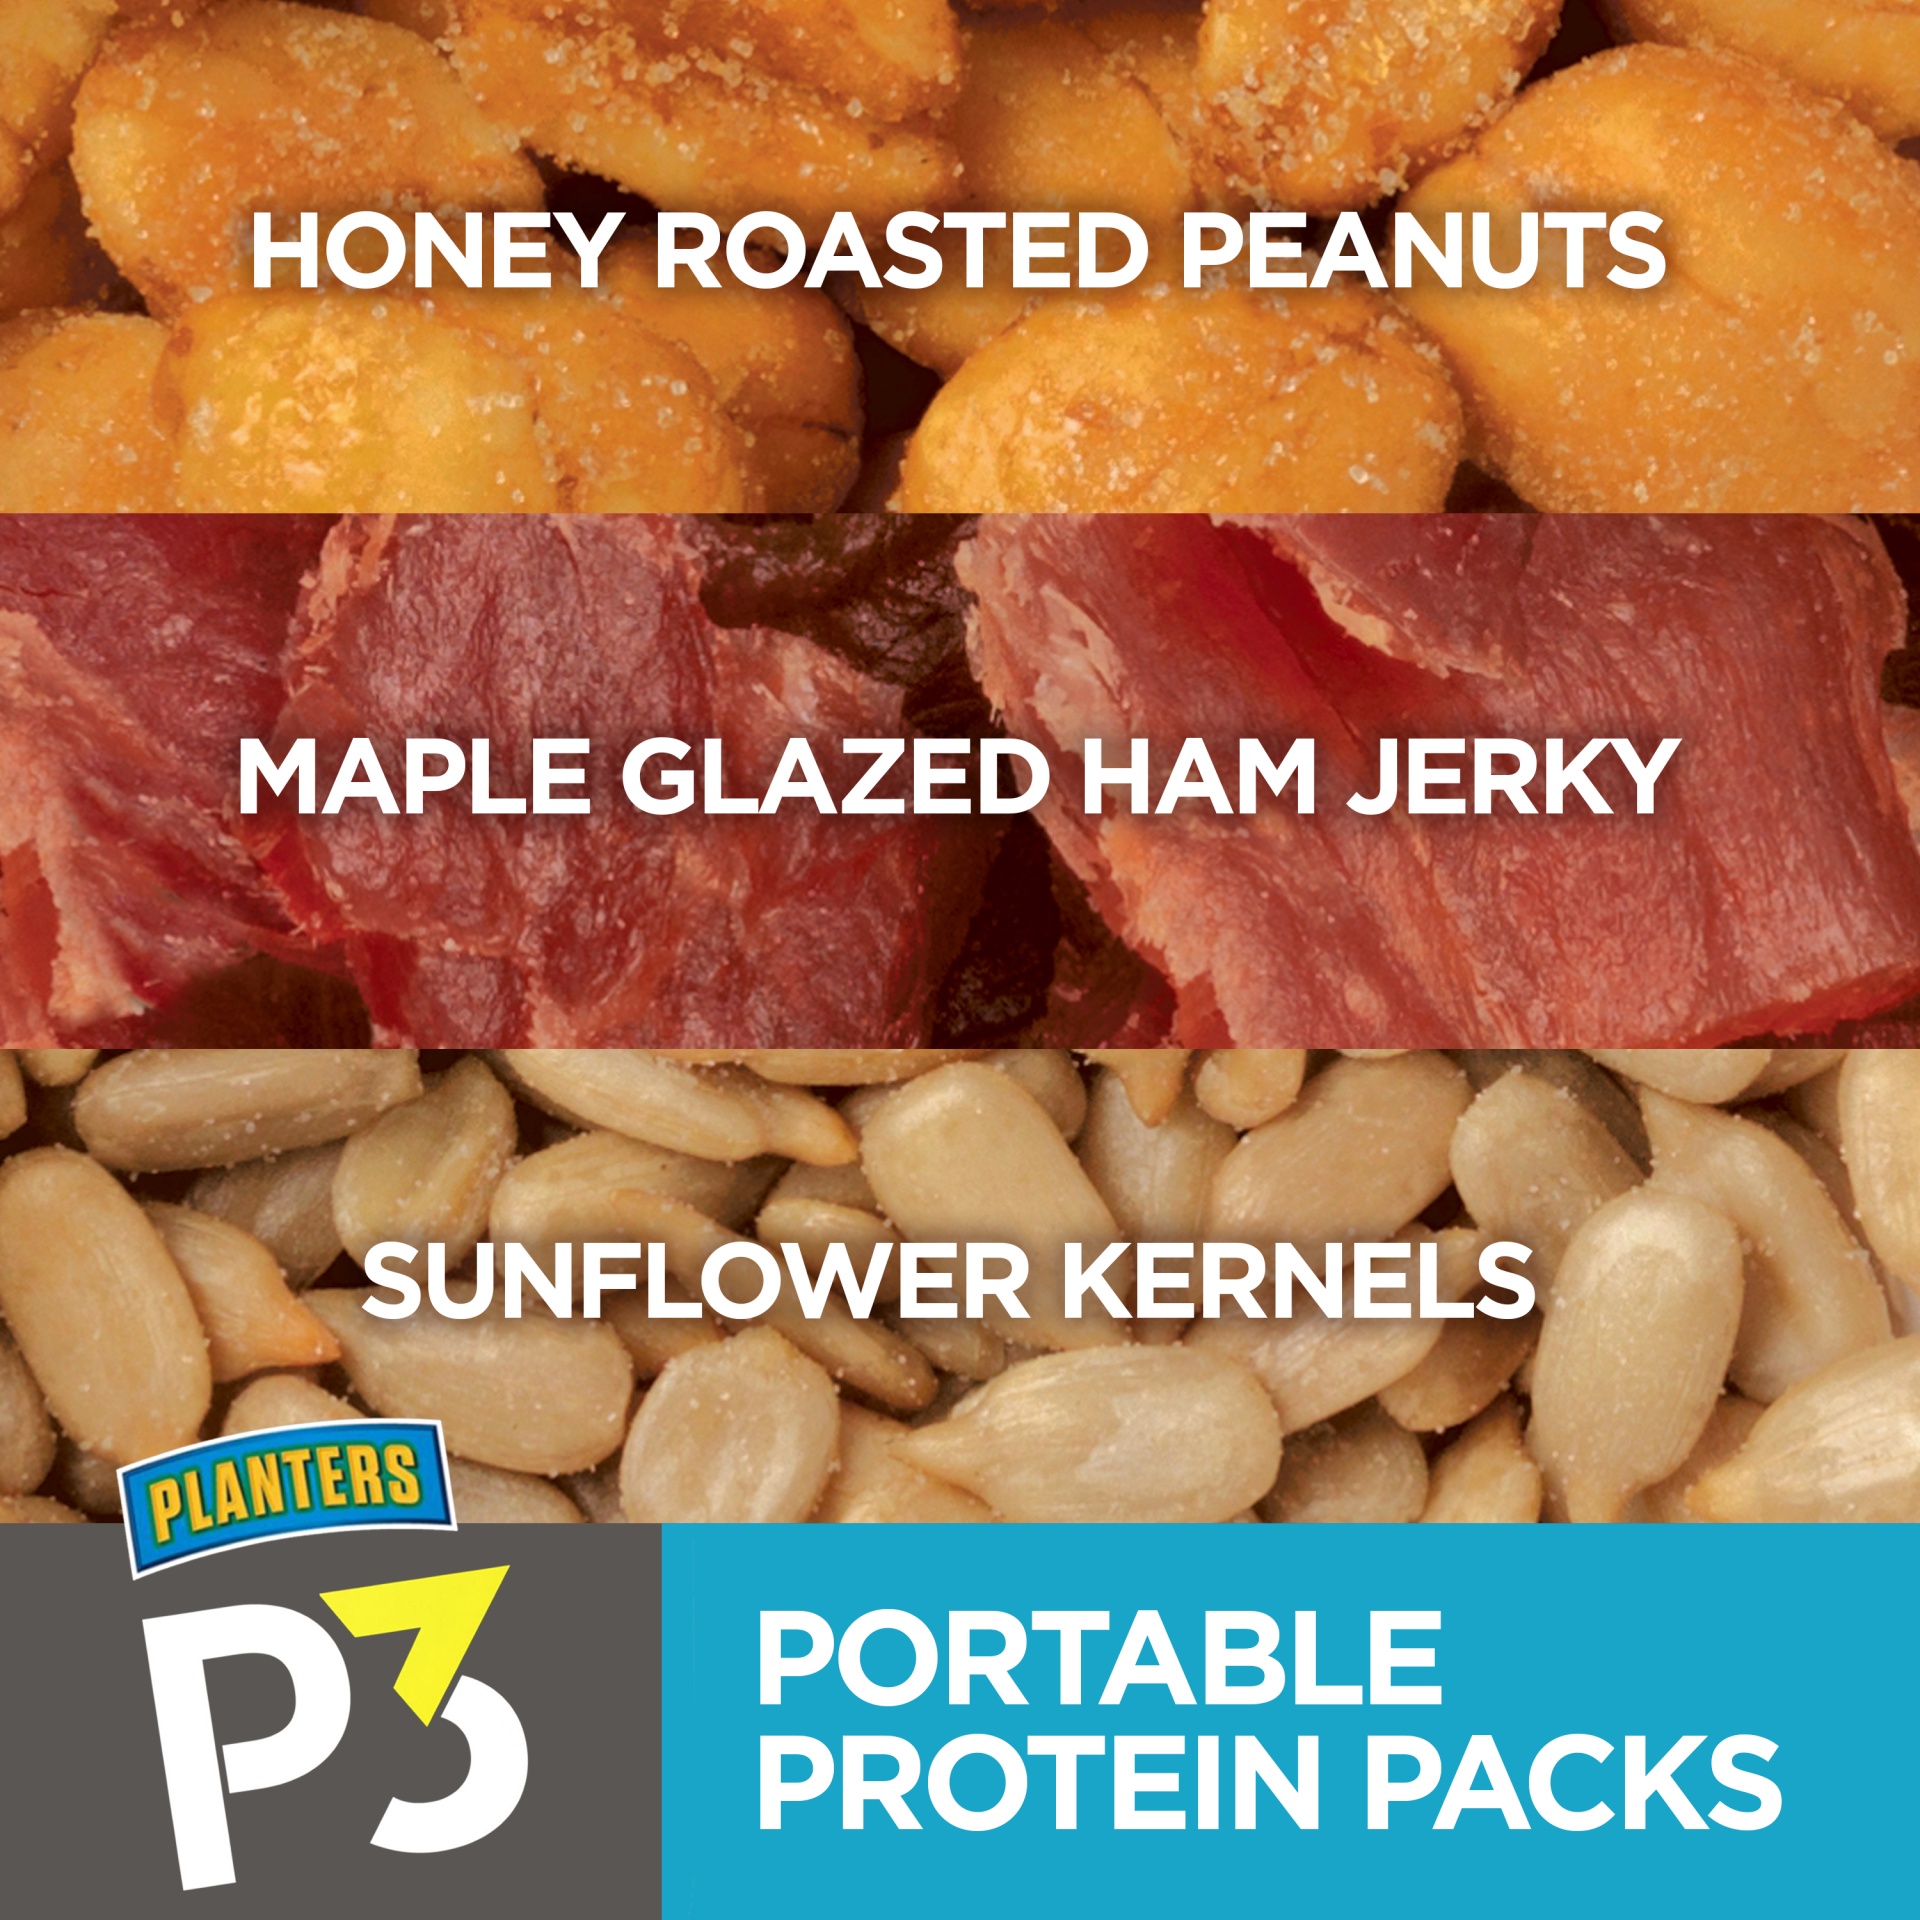 slide 2 of 7, P3 Portable Protein Snack Pack with Honey Roasted Peanuts, Sunflower Kernels & Maple Glazed Ham Jerky Trays, 5.4 oz